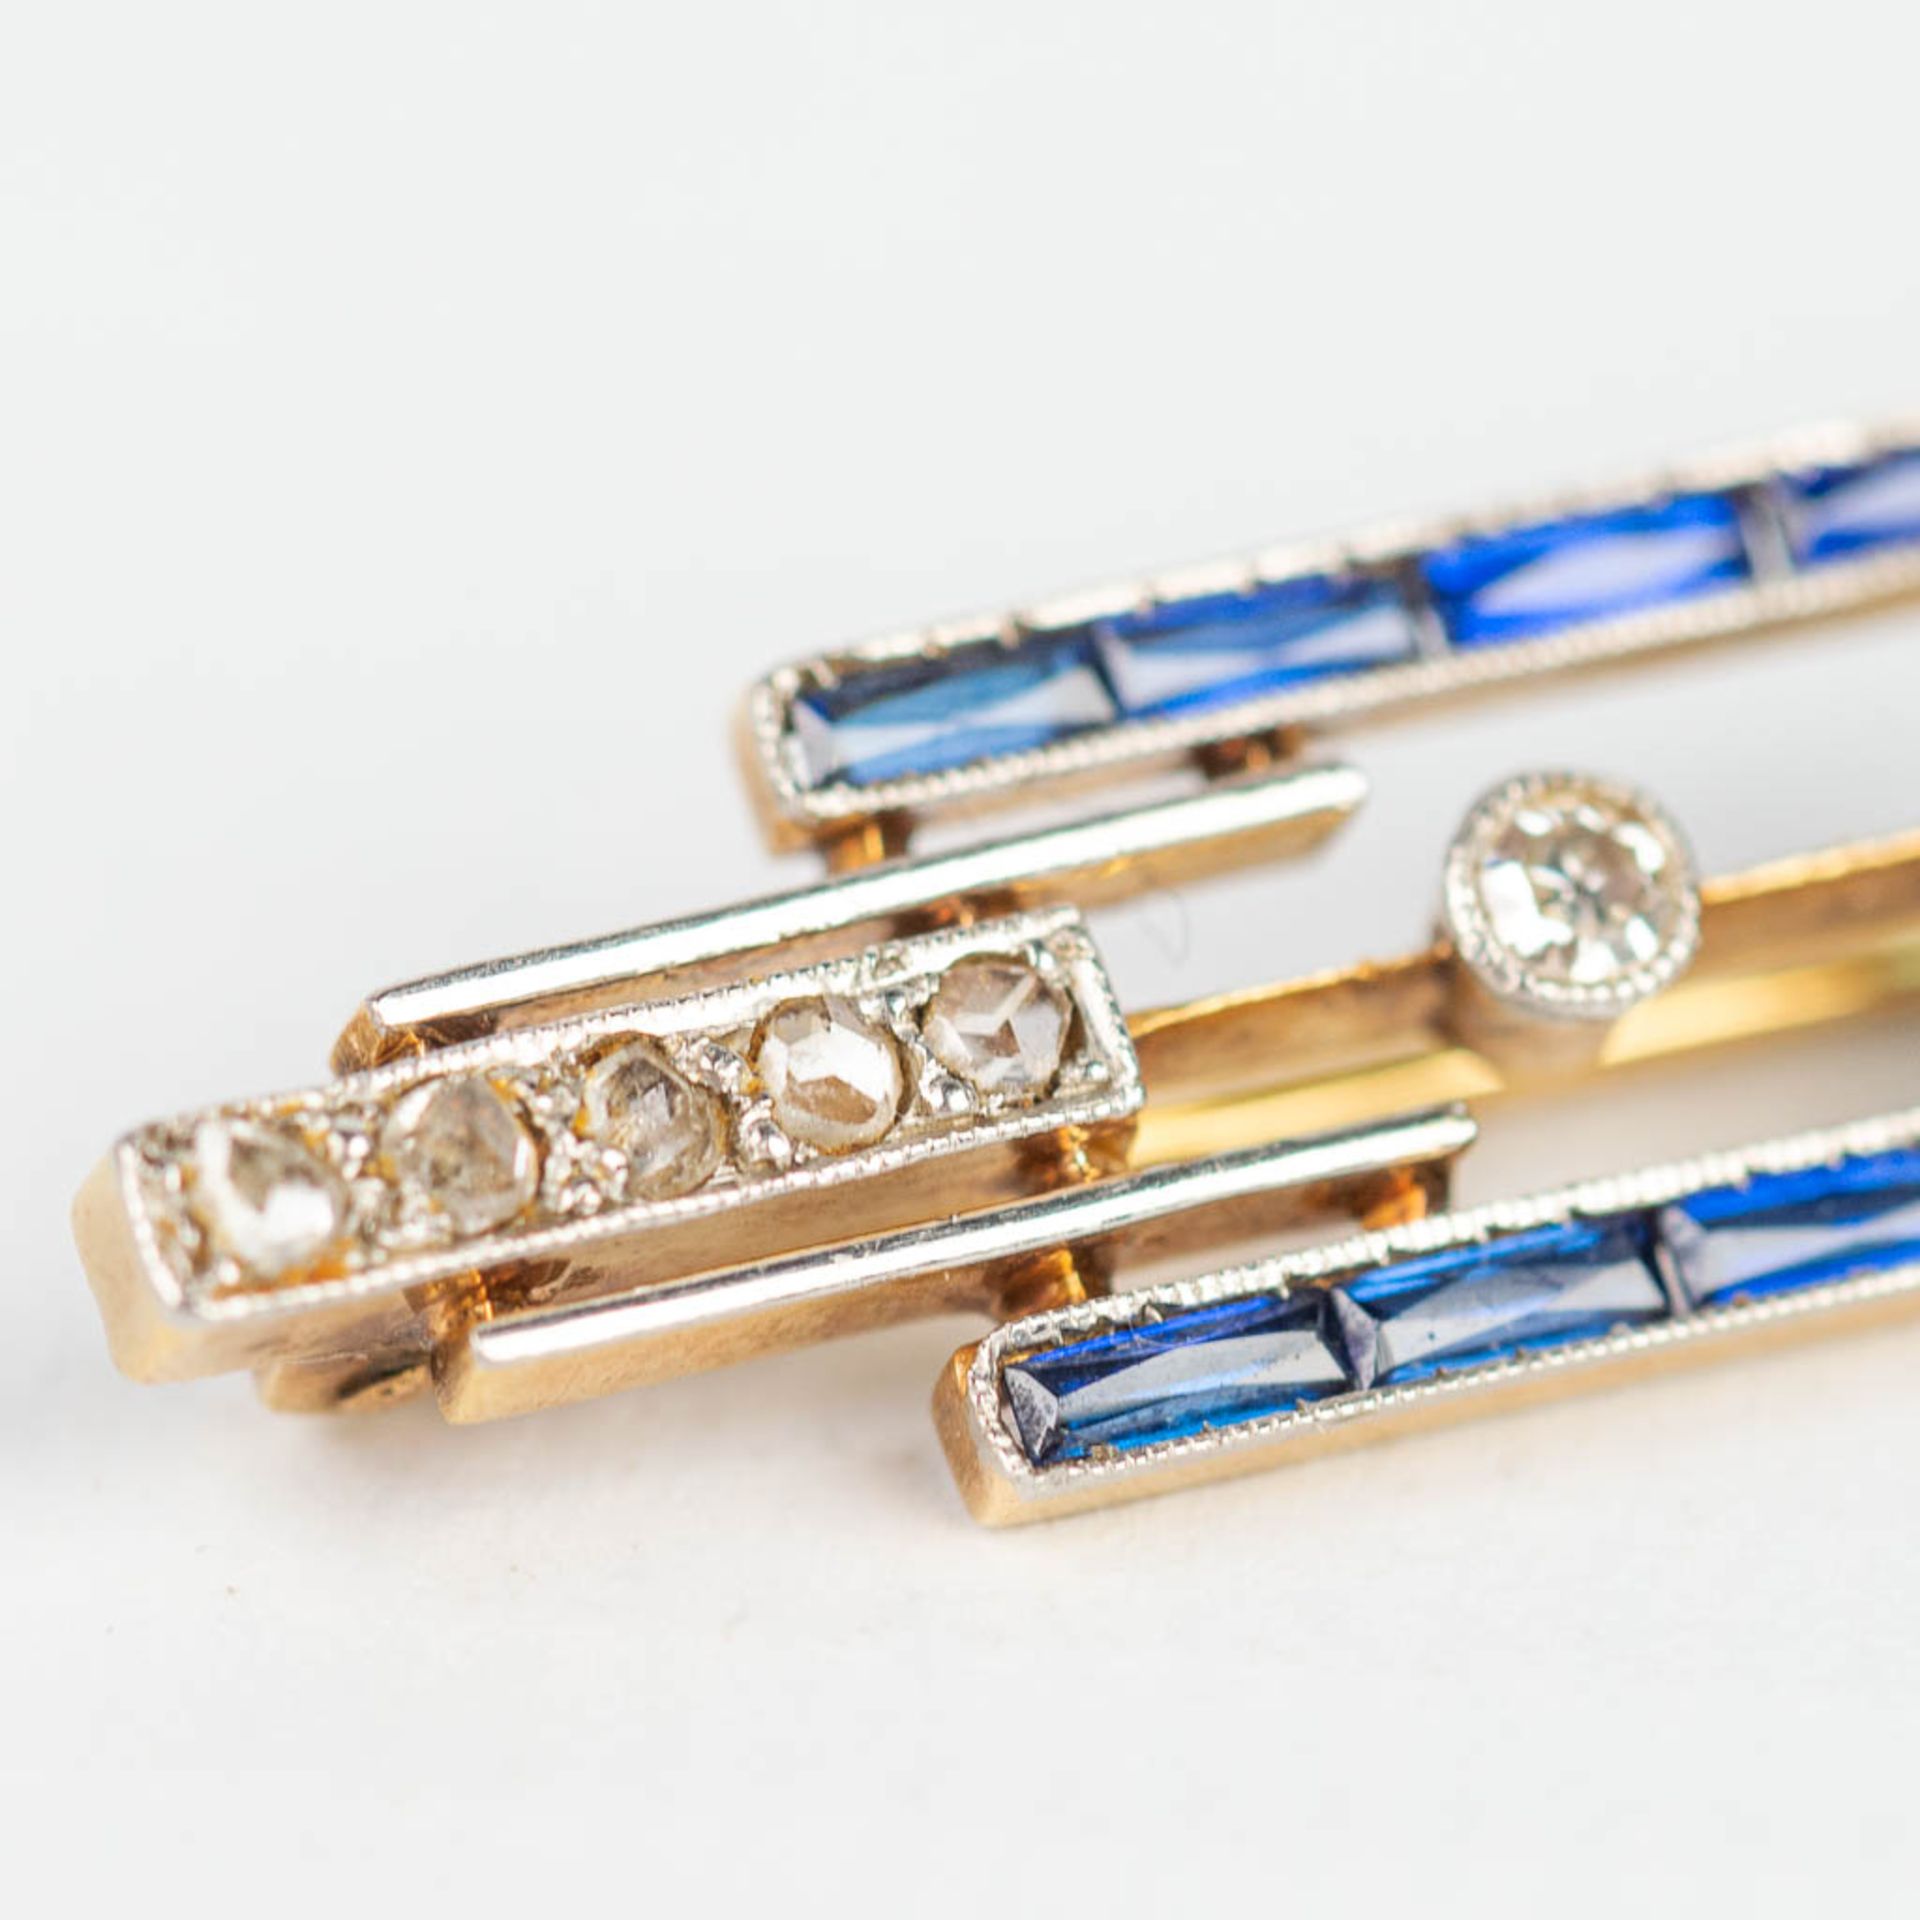 A small brooch made of yellow and white gold in art deco style, with blue sapphires. - Image 10 of 10